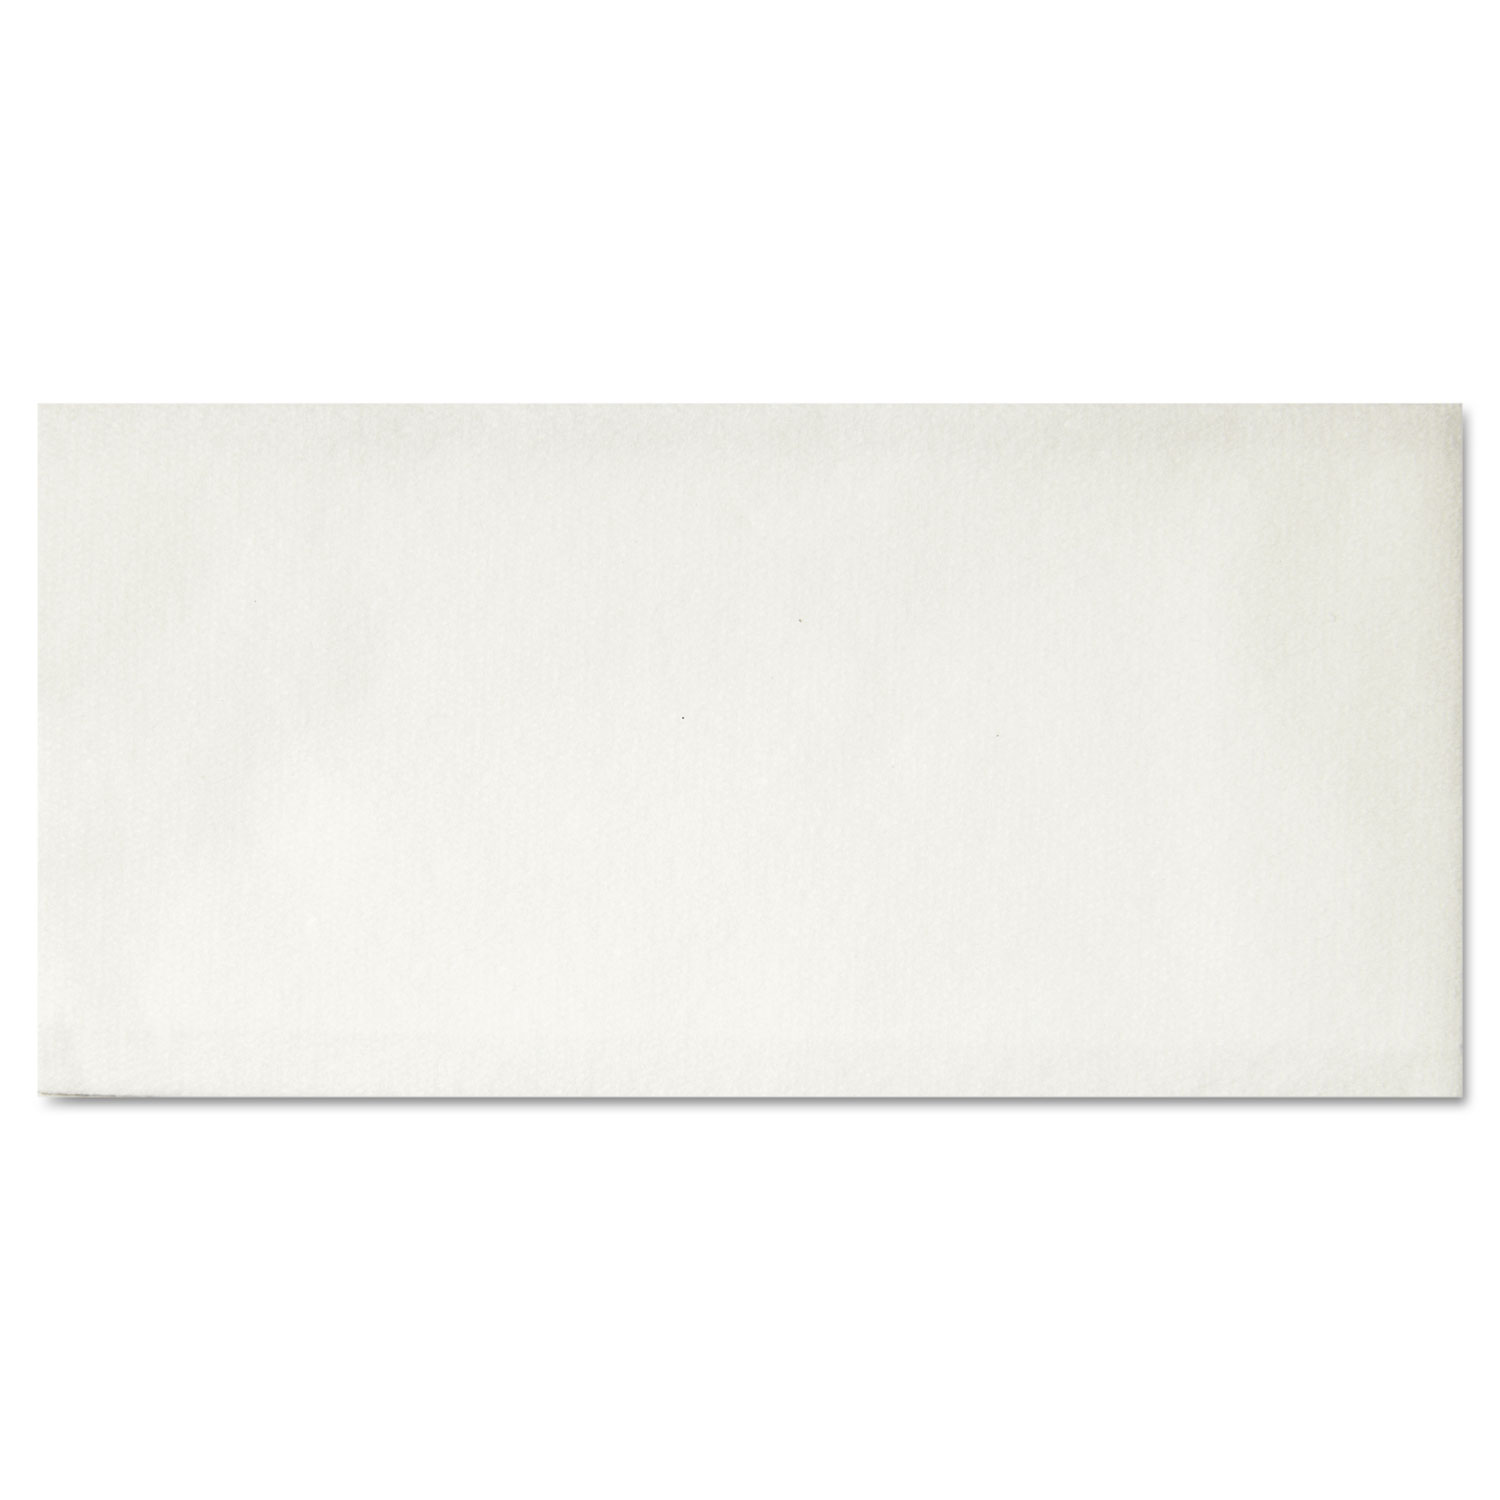  Hoffmaster 856499 Linen-Like Guest Towels, 12 x 17, White, 125 Towels/Pack, 4 Packs/Carton (HFM856499) 